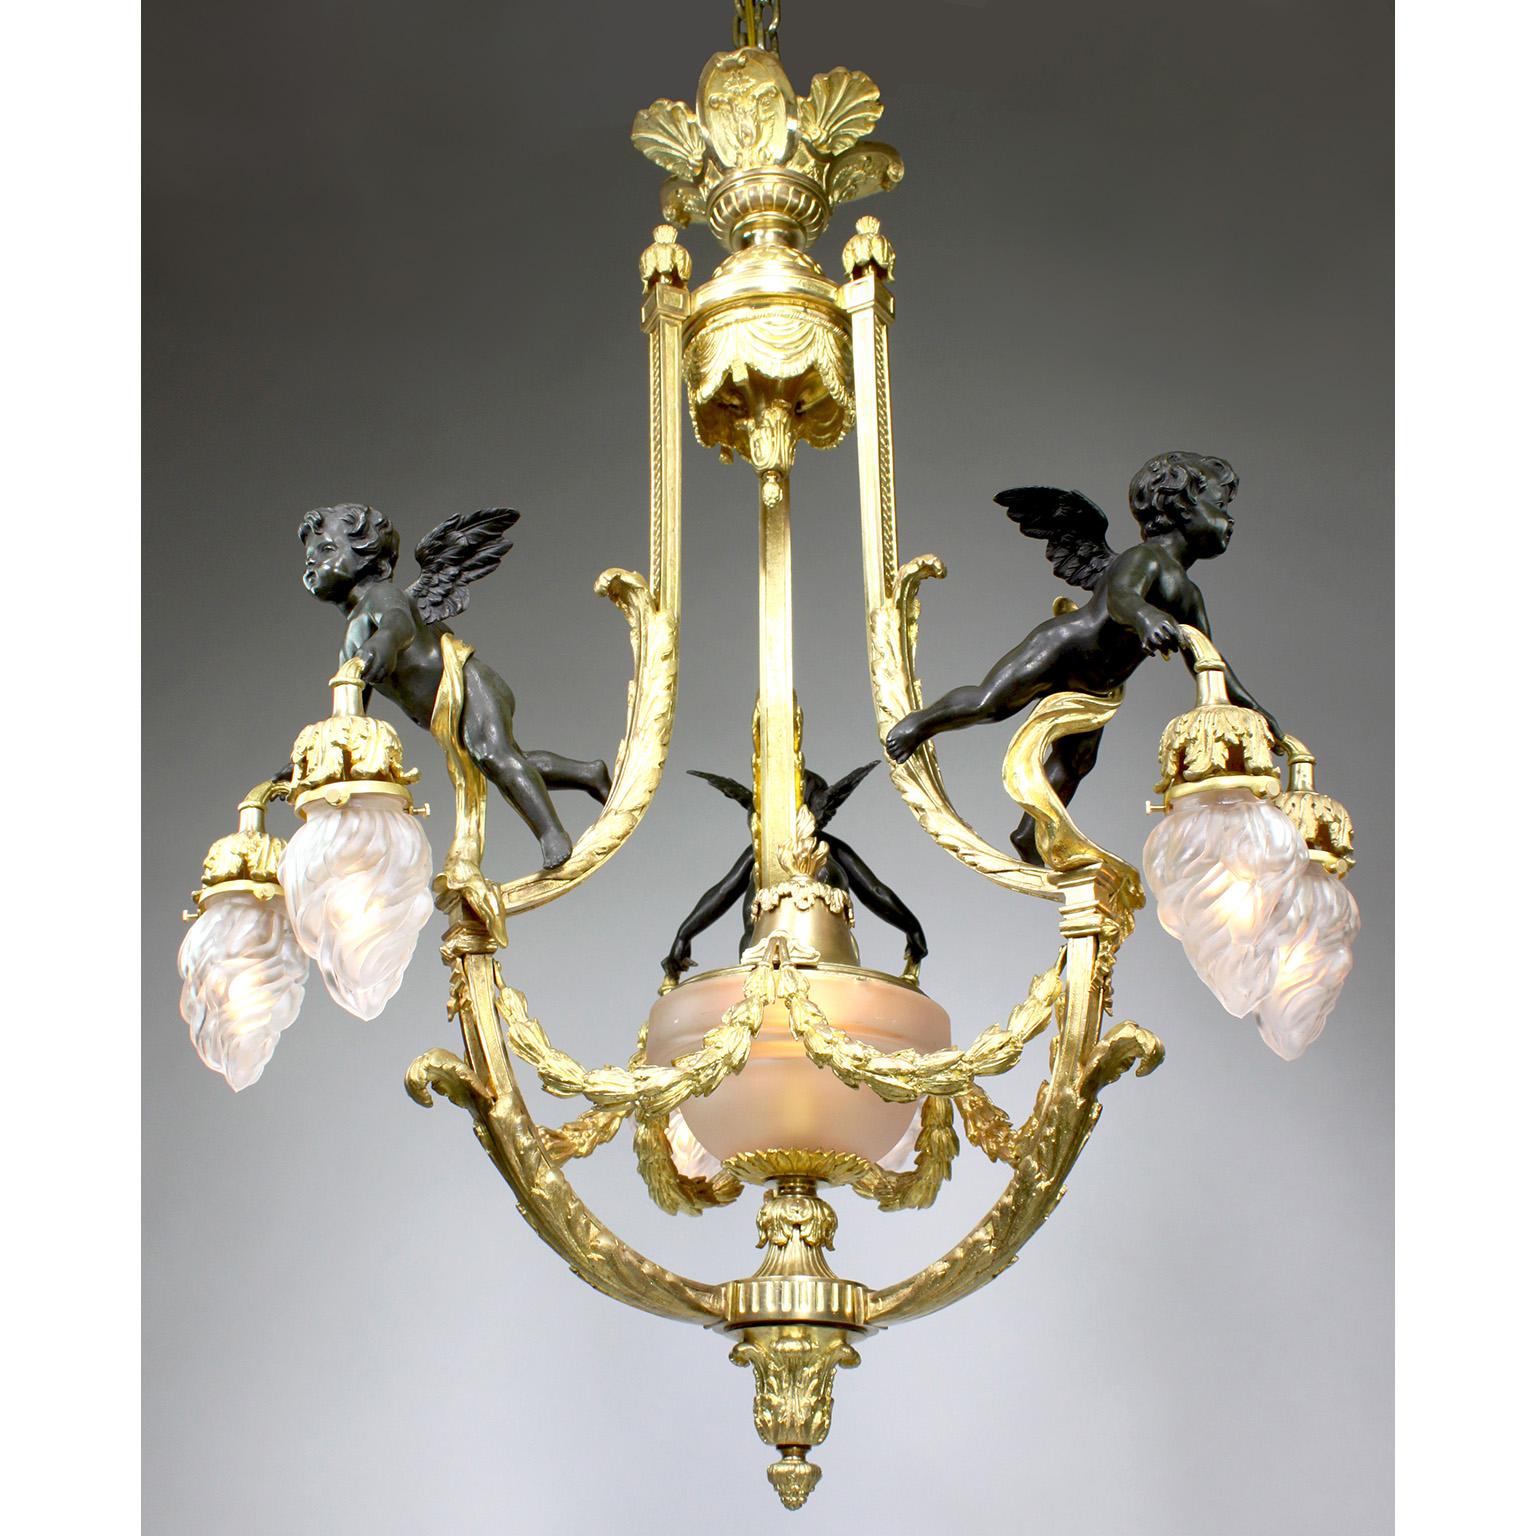 A fine and Rare Whimsical French 19th/20th century Belle Époque Gilt-Bronze and Patinated Bronze Figural Seven-Light Chandelier. The with frosted glass flame shades centered with a frosted edged-glass urn with a gilt-bronze rim and acorn finial, all